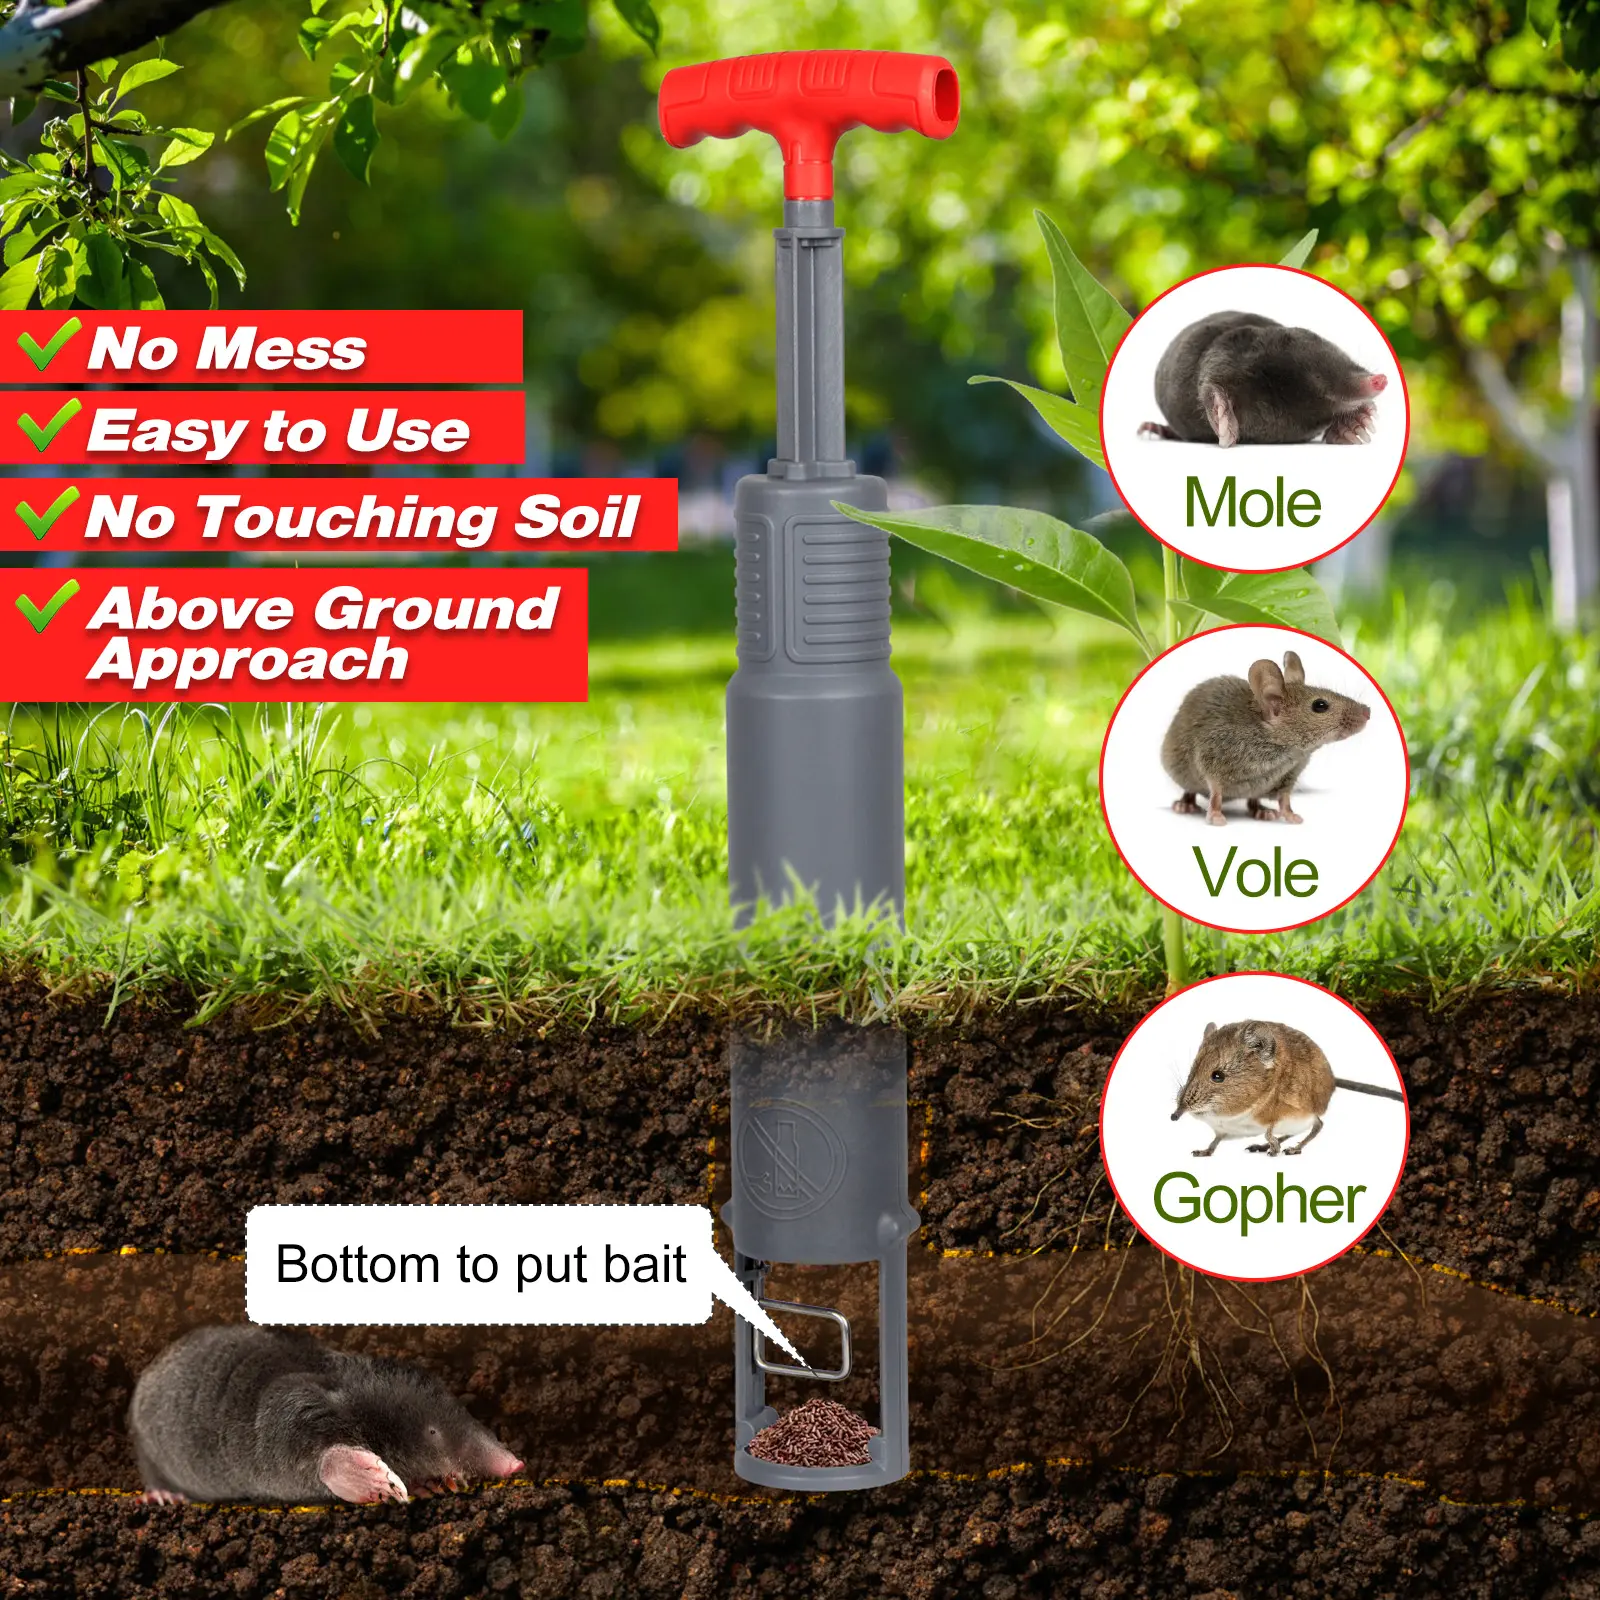 Trusted Effective Pest Control For Agricultural Land Gardens And Lawns Minnesota Mole Trap